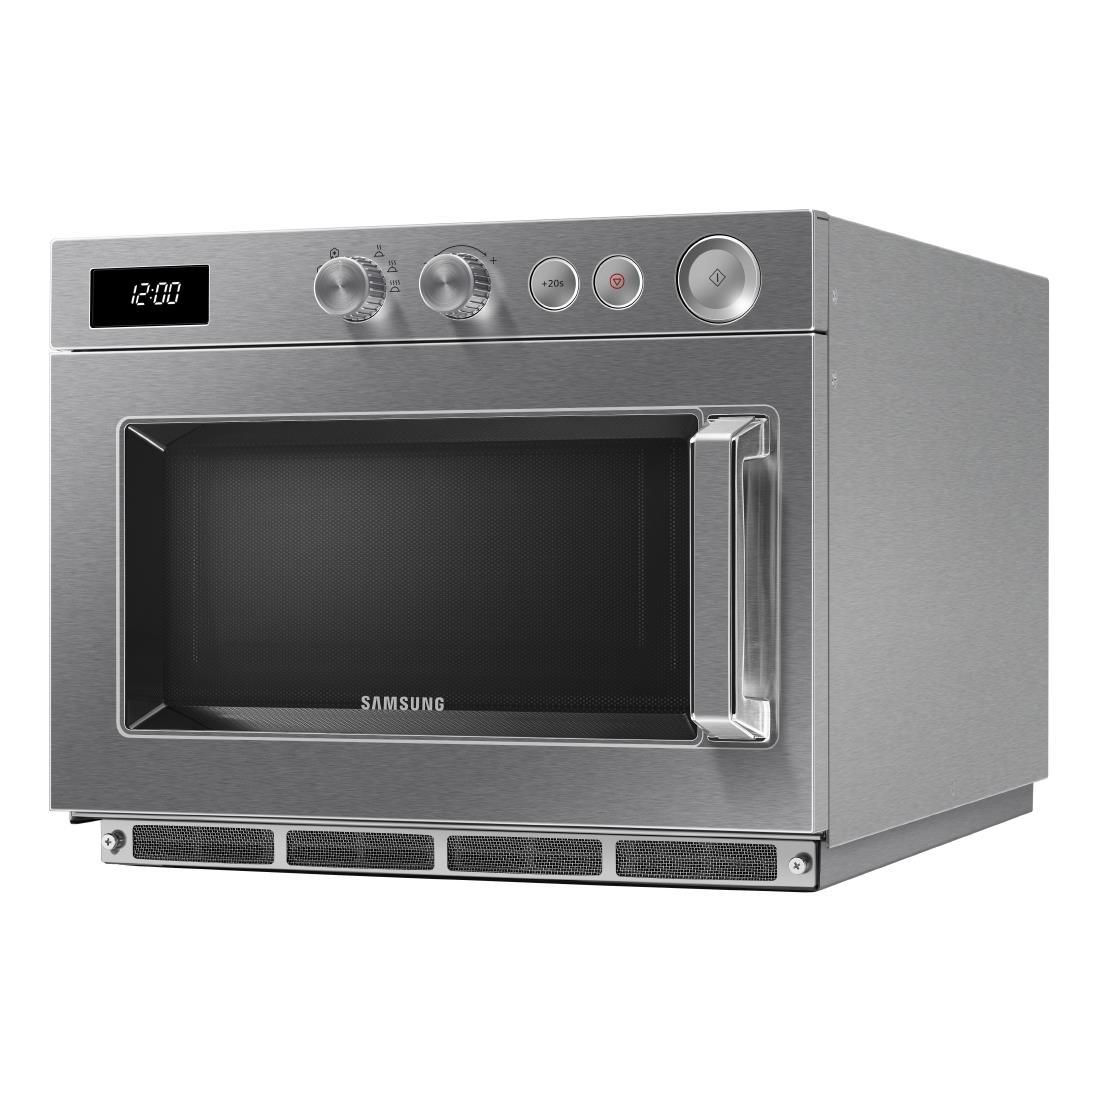 Samsung Commercial Microwave Manual 26Ltr 1500W - FS317  - 2